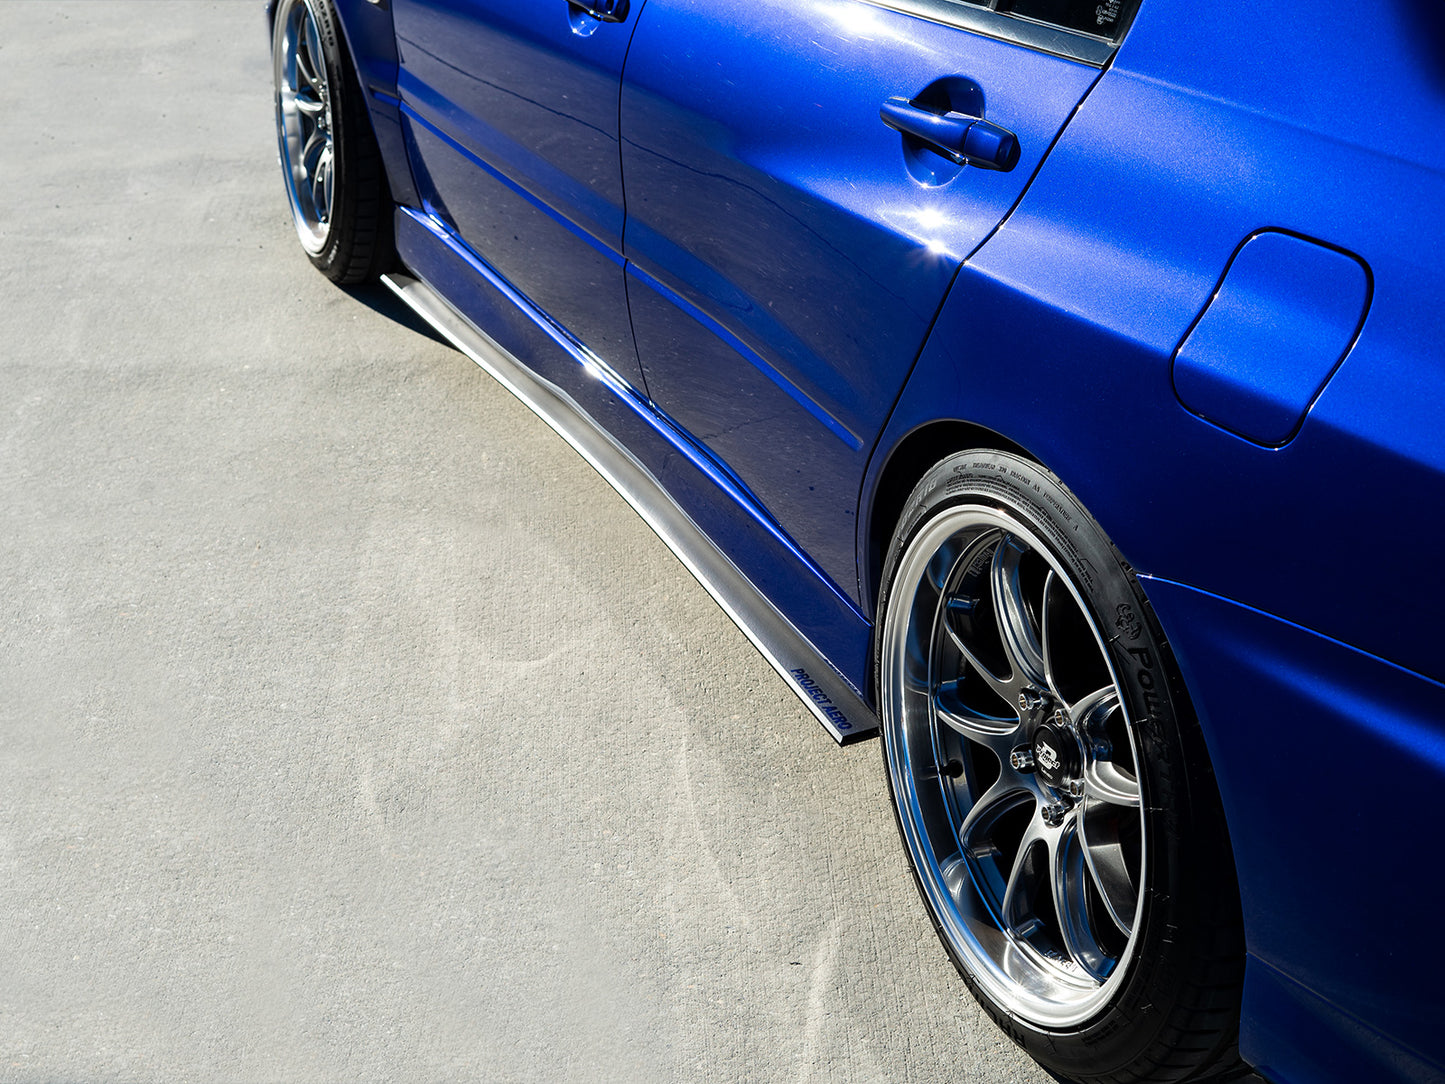 Project Aero Mitsubishi Evo 7, 8 and 9 side skirt extensions are a popular addition to any Evo creating a more subtle and look